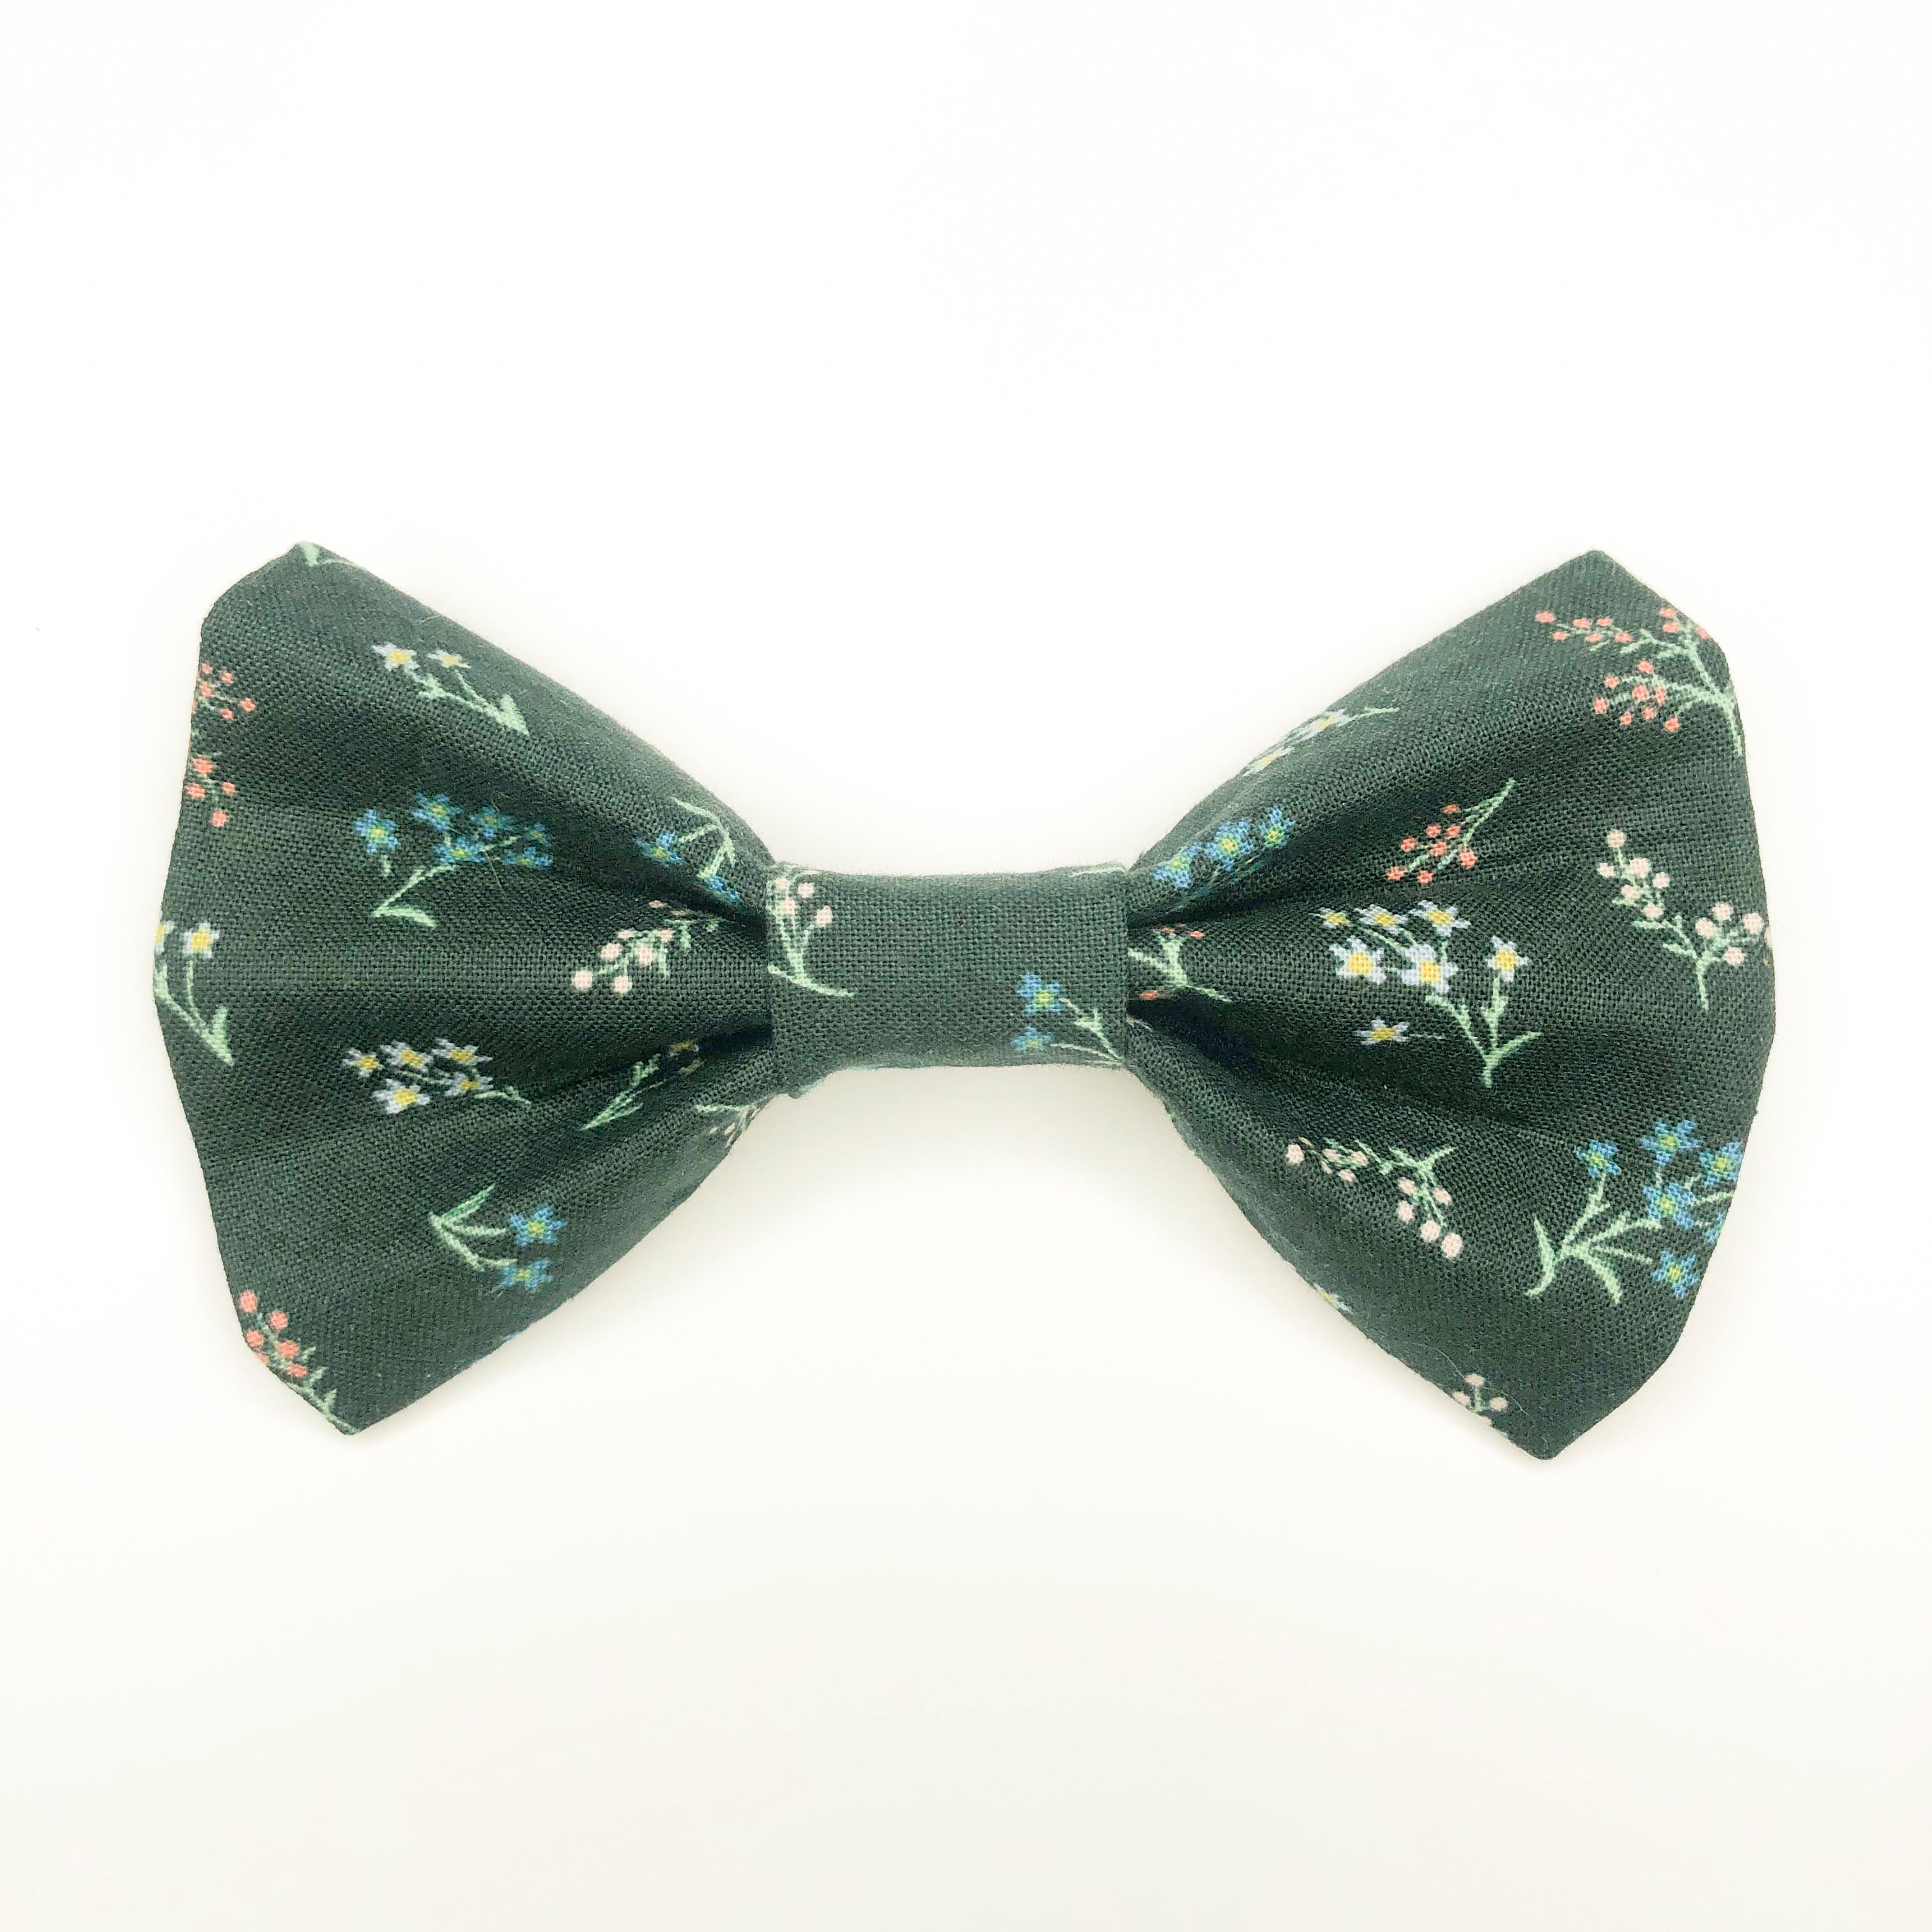 Quality bow tie made for large dogs, dogs with long fur, and little dogs looking to make a bold statement.  Each bow tie is made with quality quilting cotton and stiff interfacing with two loops of elastic. The two elastic loops to prevent bow tie drooping and fits tightly over a standard 1” wide dog collar.  Bow tie Length 5“". Height 3.5".  Elastic fits 1” collar.  Lora Lynn Design